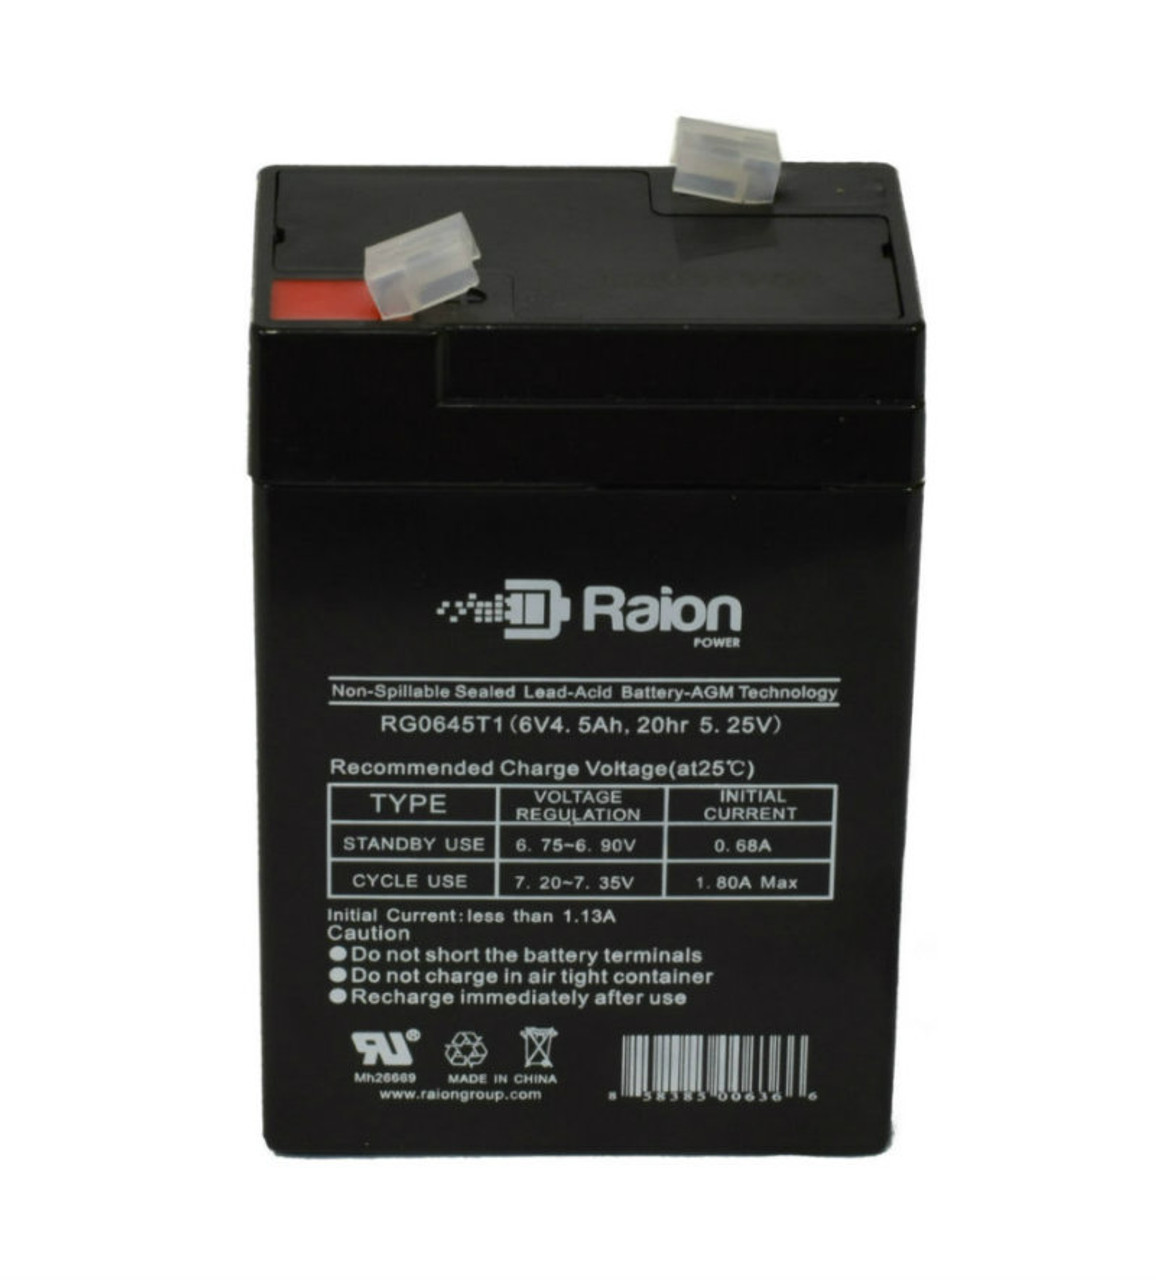 Raion Power RG0645T1 Replacement Battery Cartridge for Peg Perego IGMD0003 6V Mini Princess